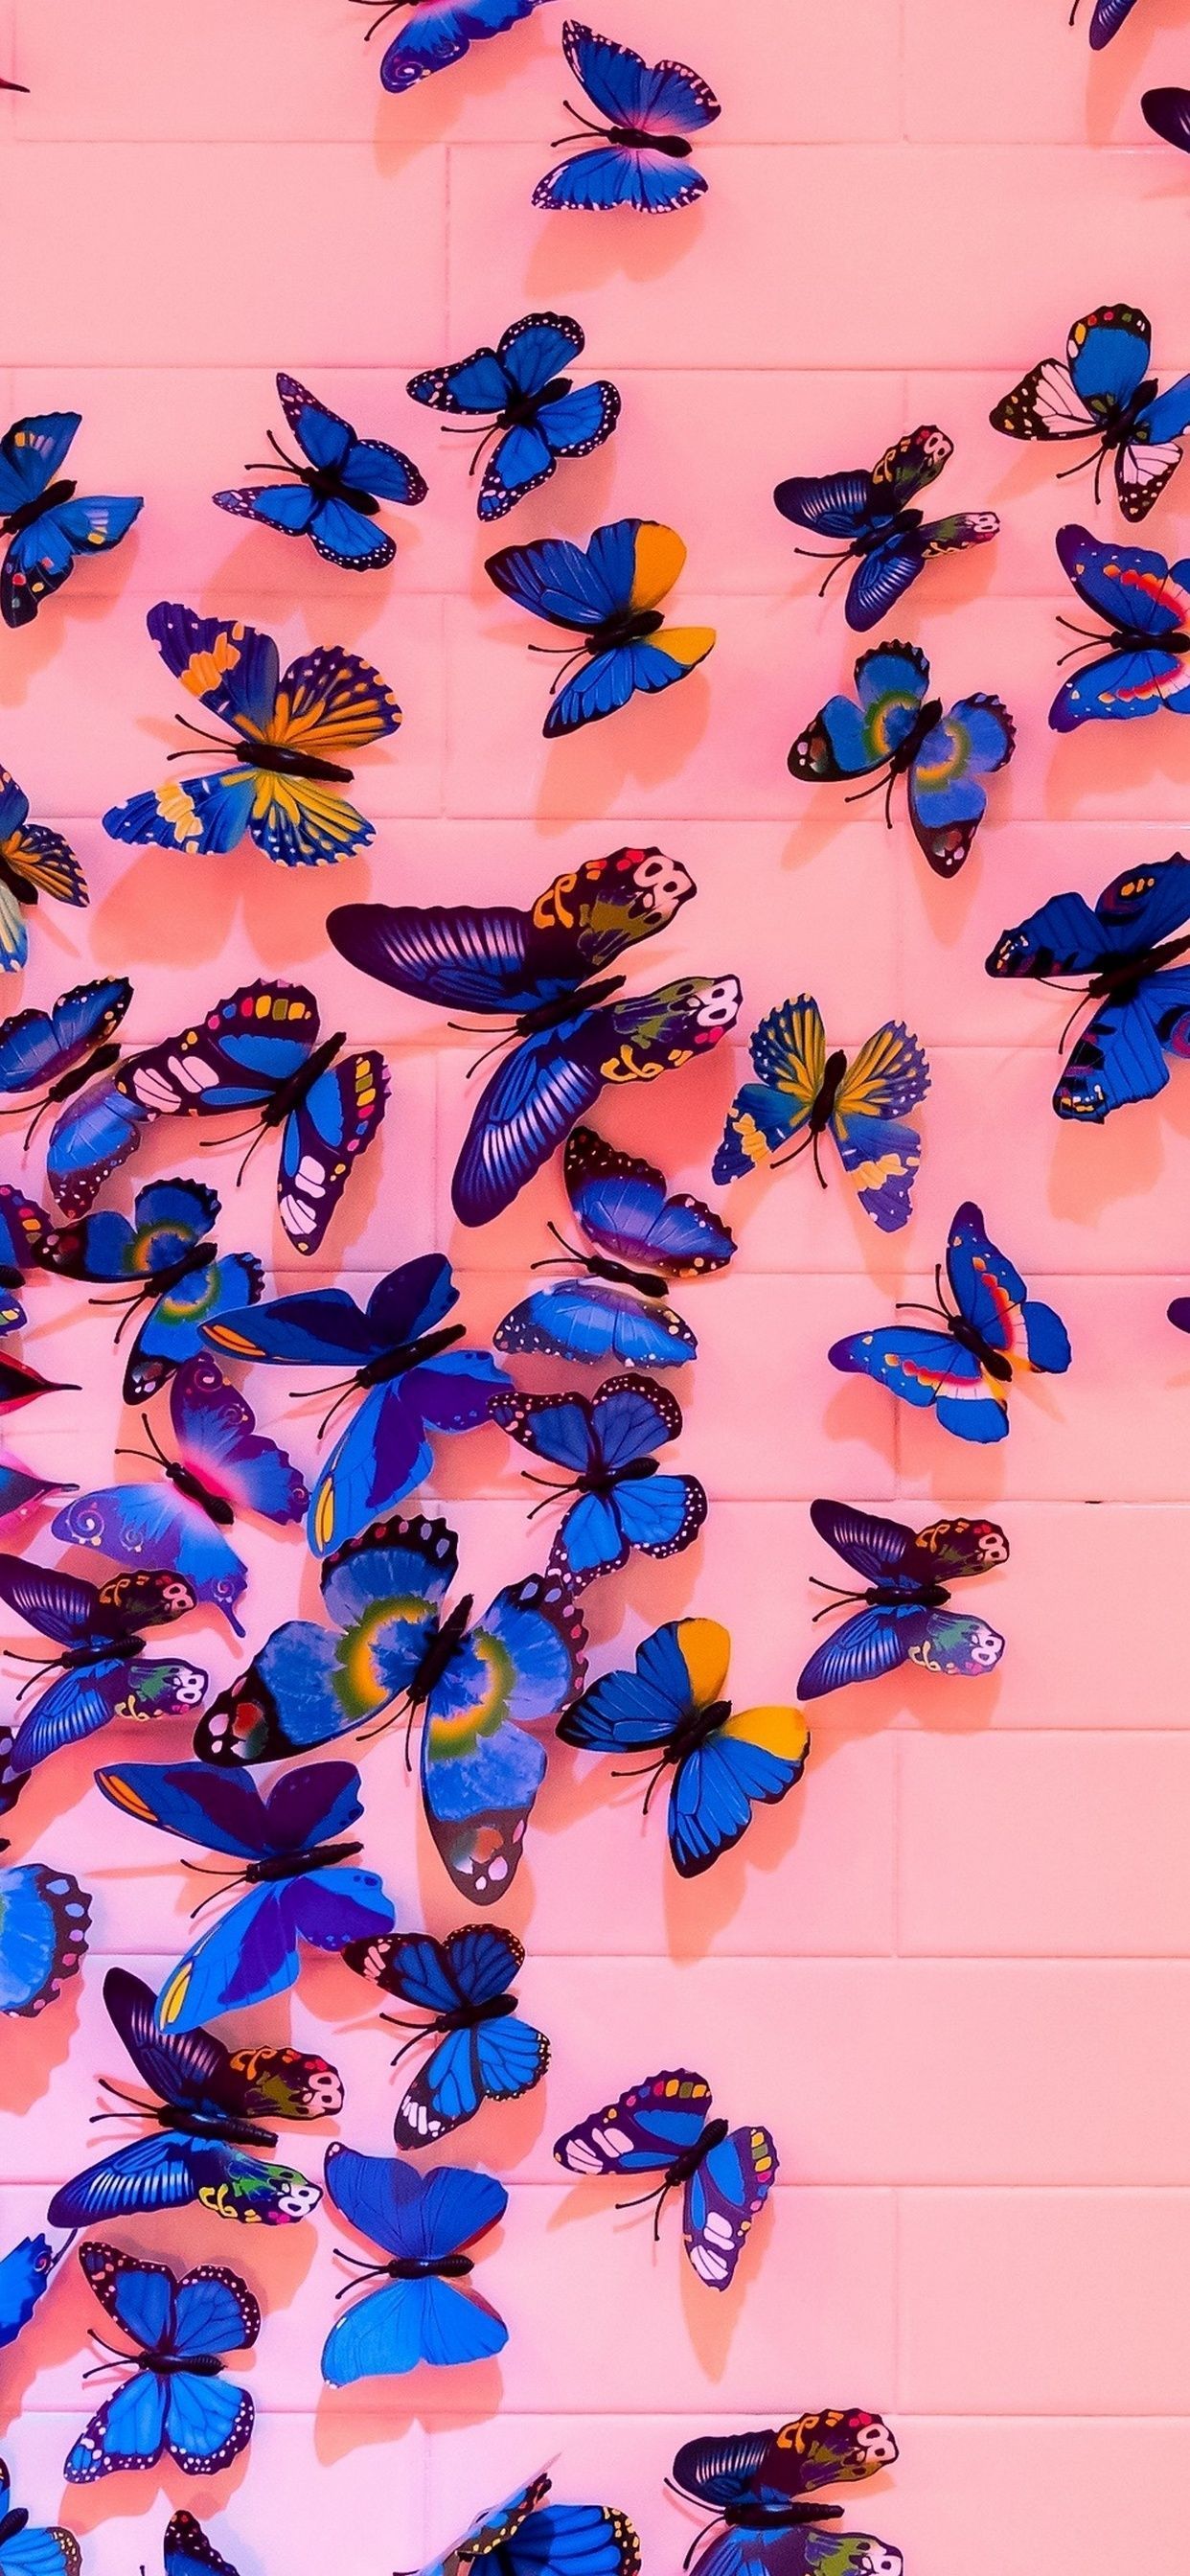 Aesthetic Butterfly Wallpaper Free Aesthetic Butterfly Background